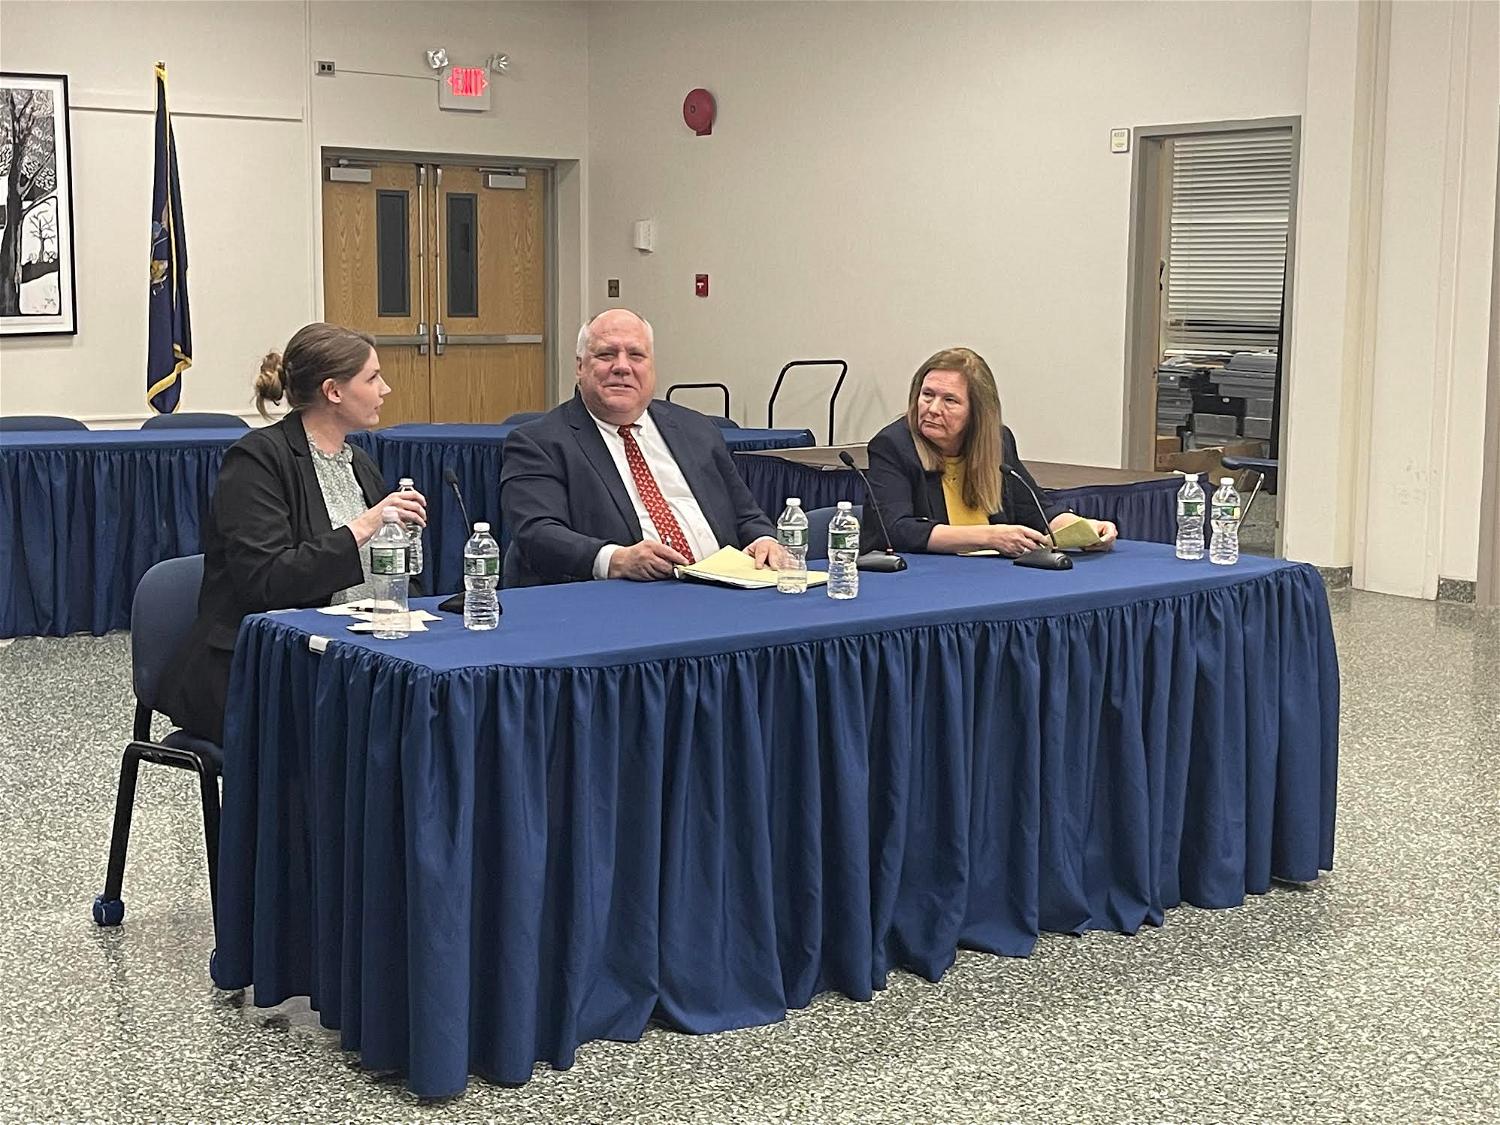 Candidates for the Board of Education are, from left, Amanda Cascio, David Badanes and Donna McNaughton.